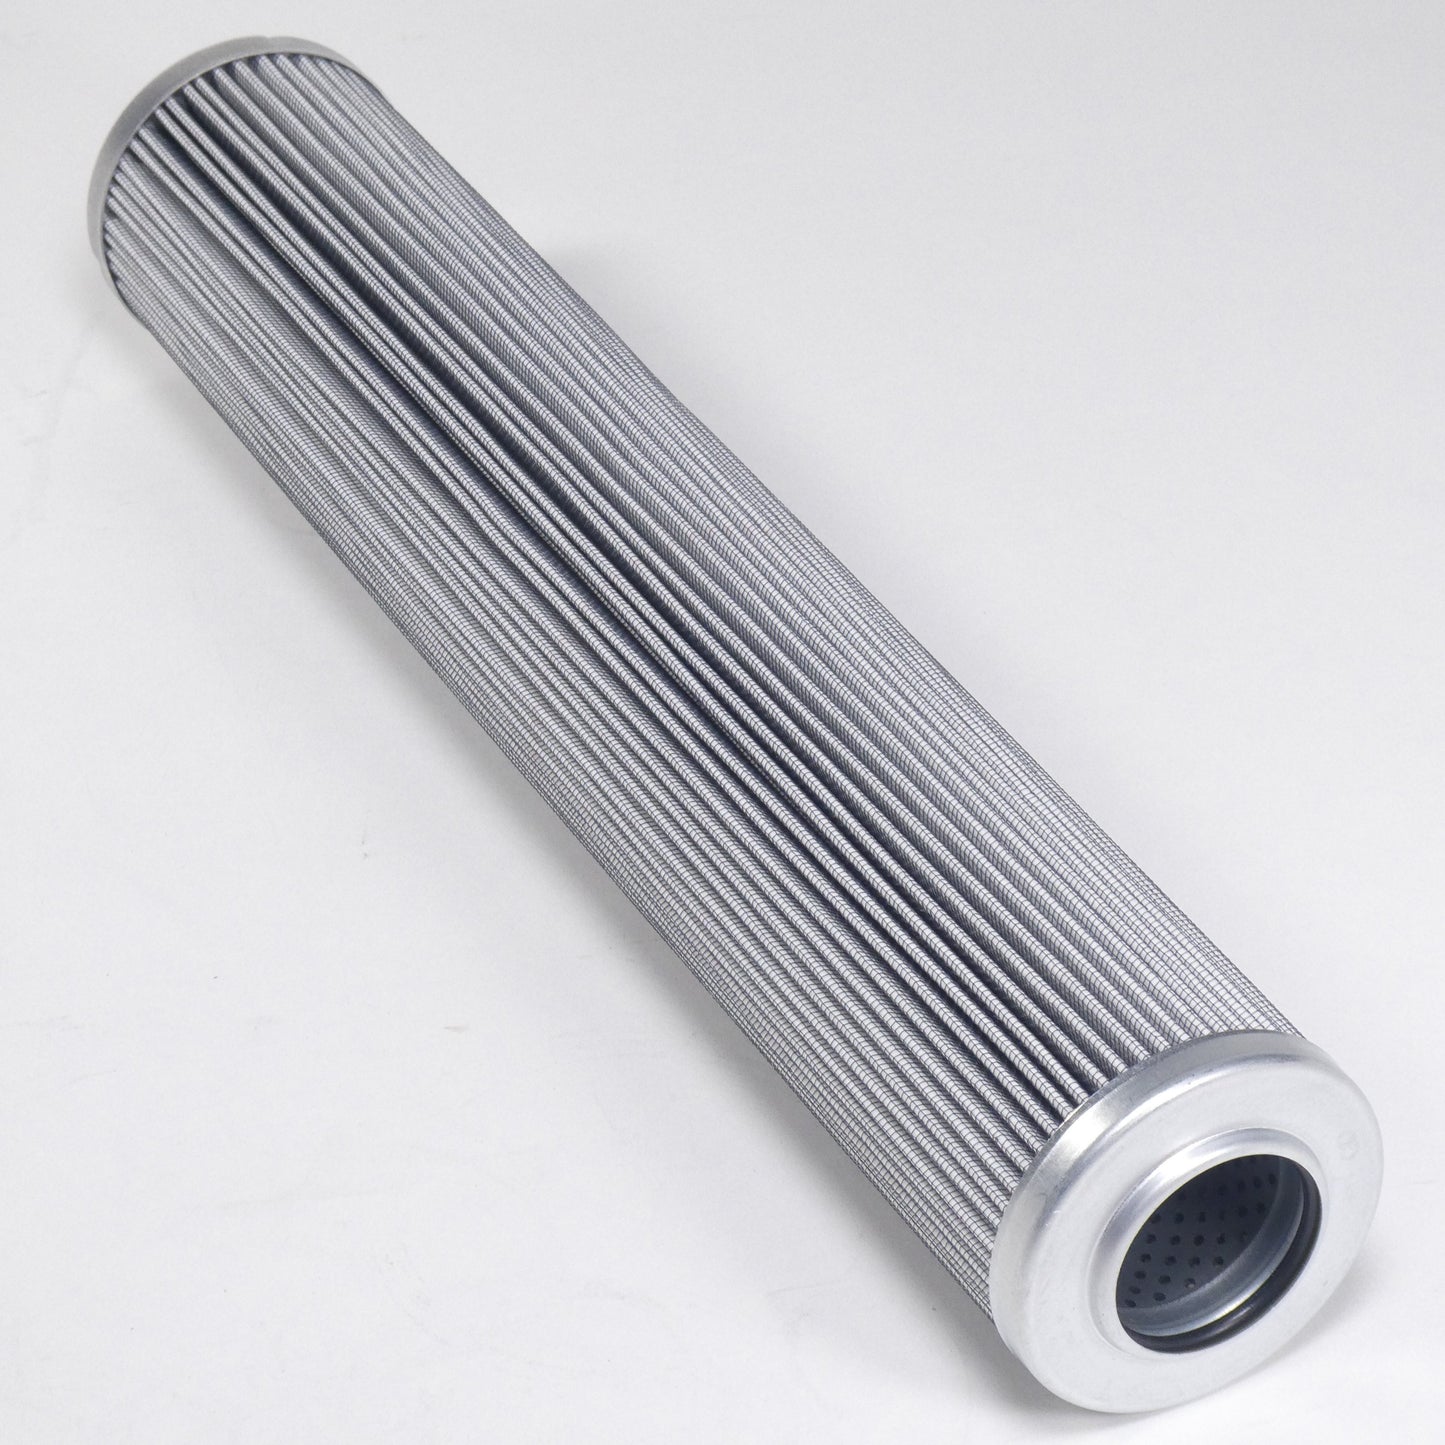 Hydrafil Replacement Filter Element for Vickers V6021V5C03